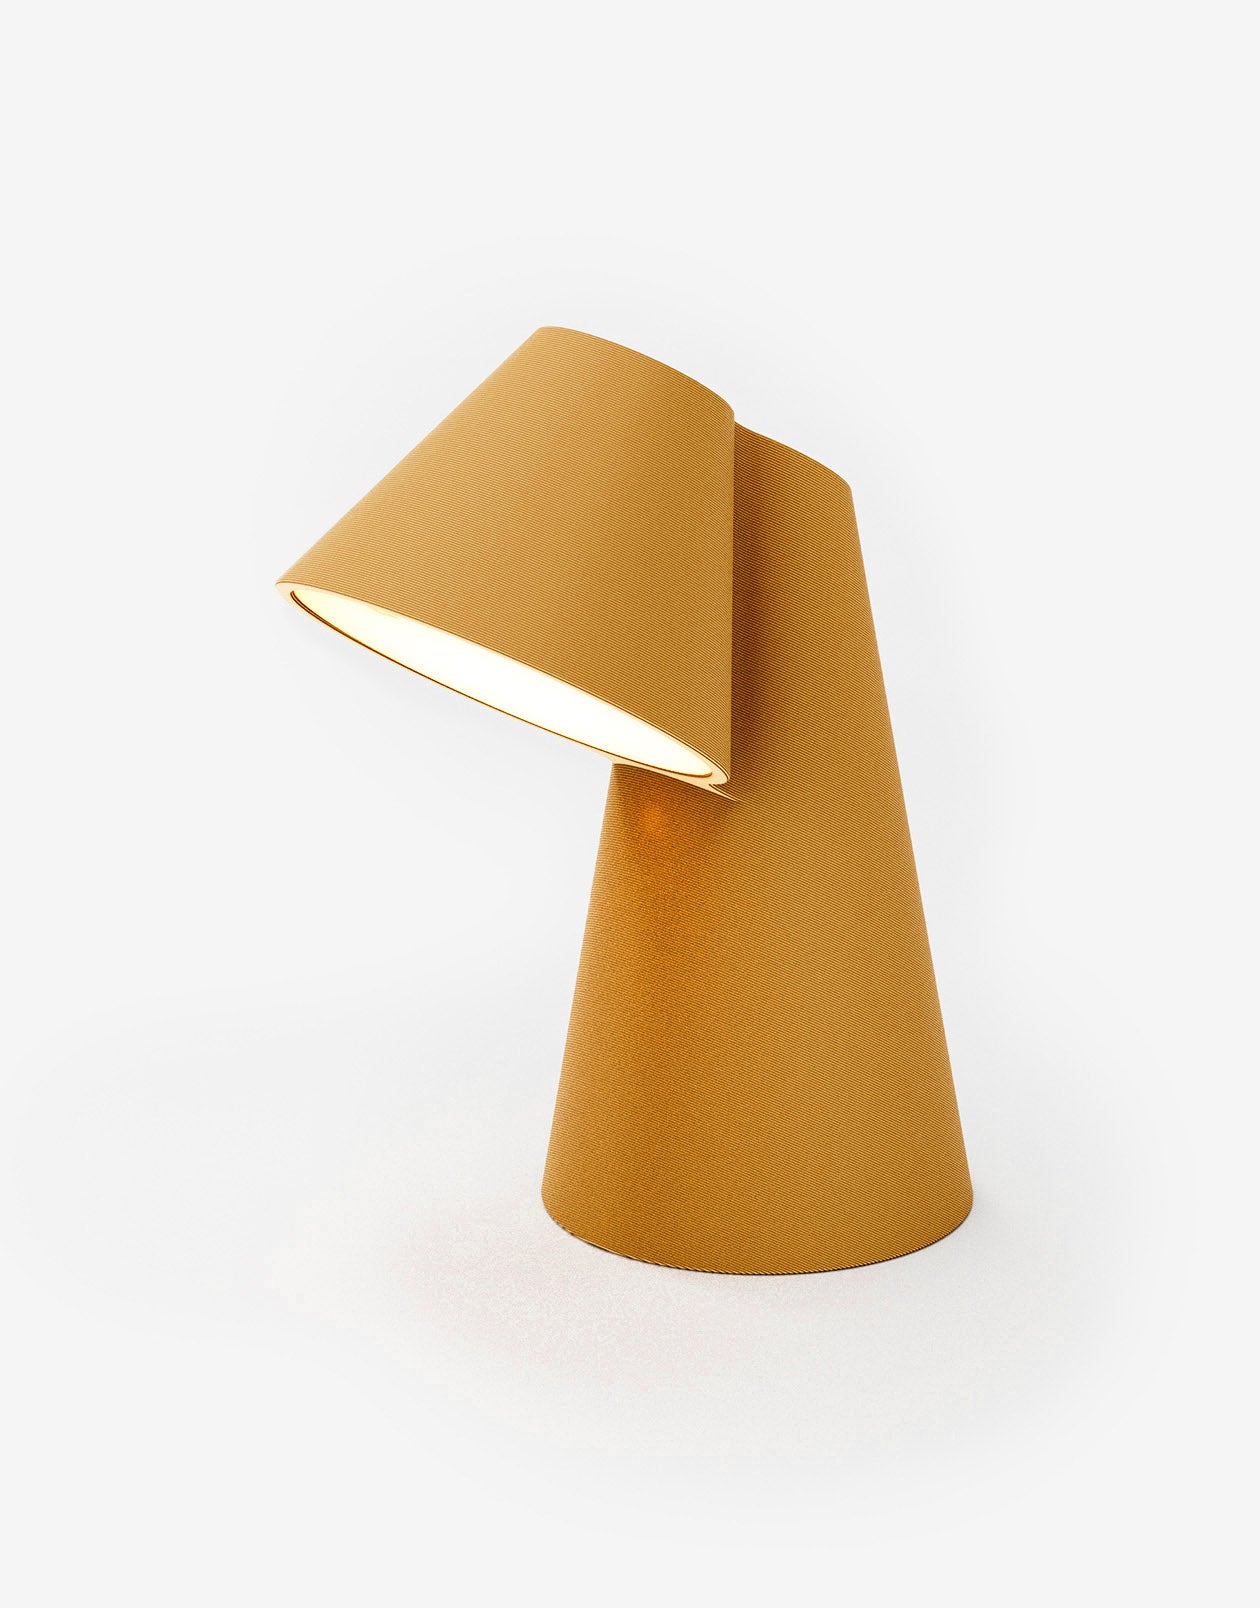 Monk - Table lamp